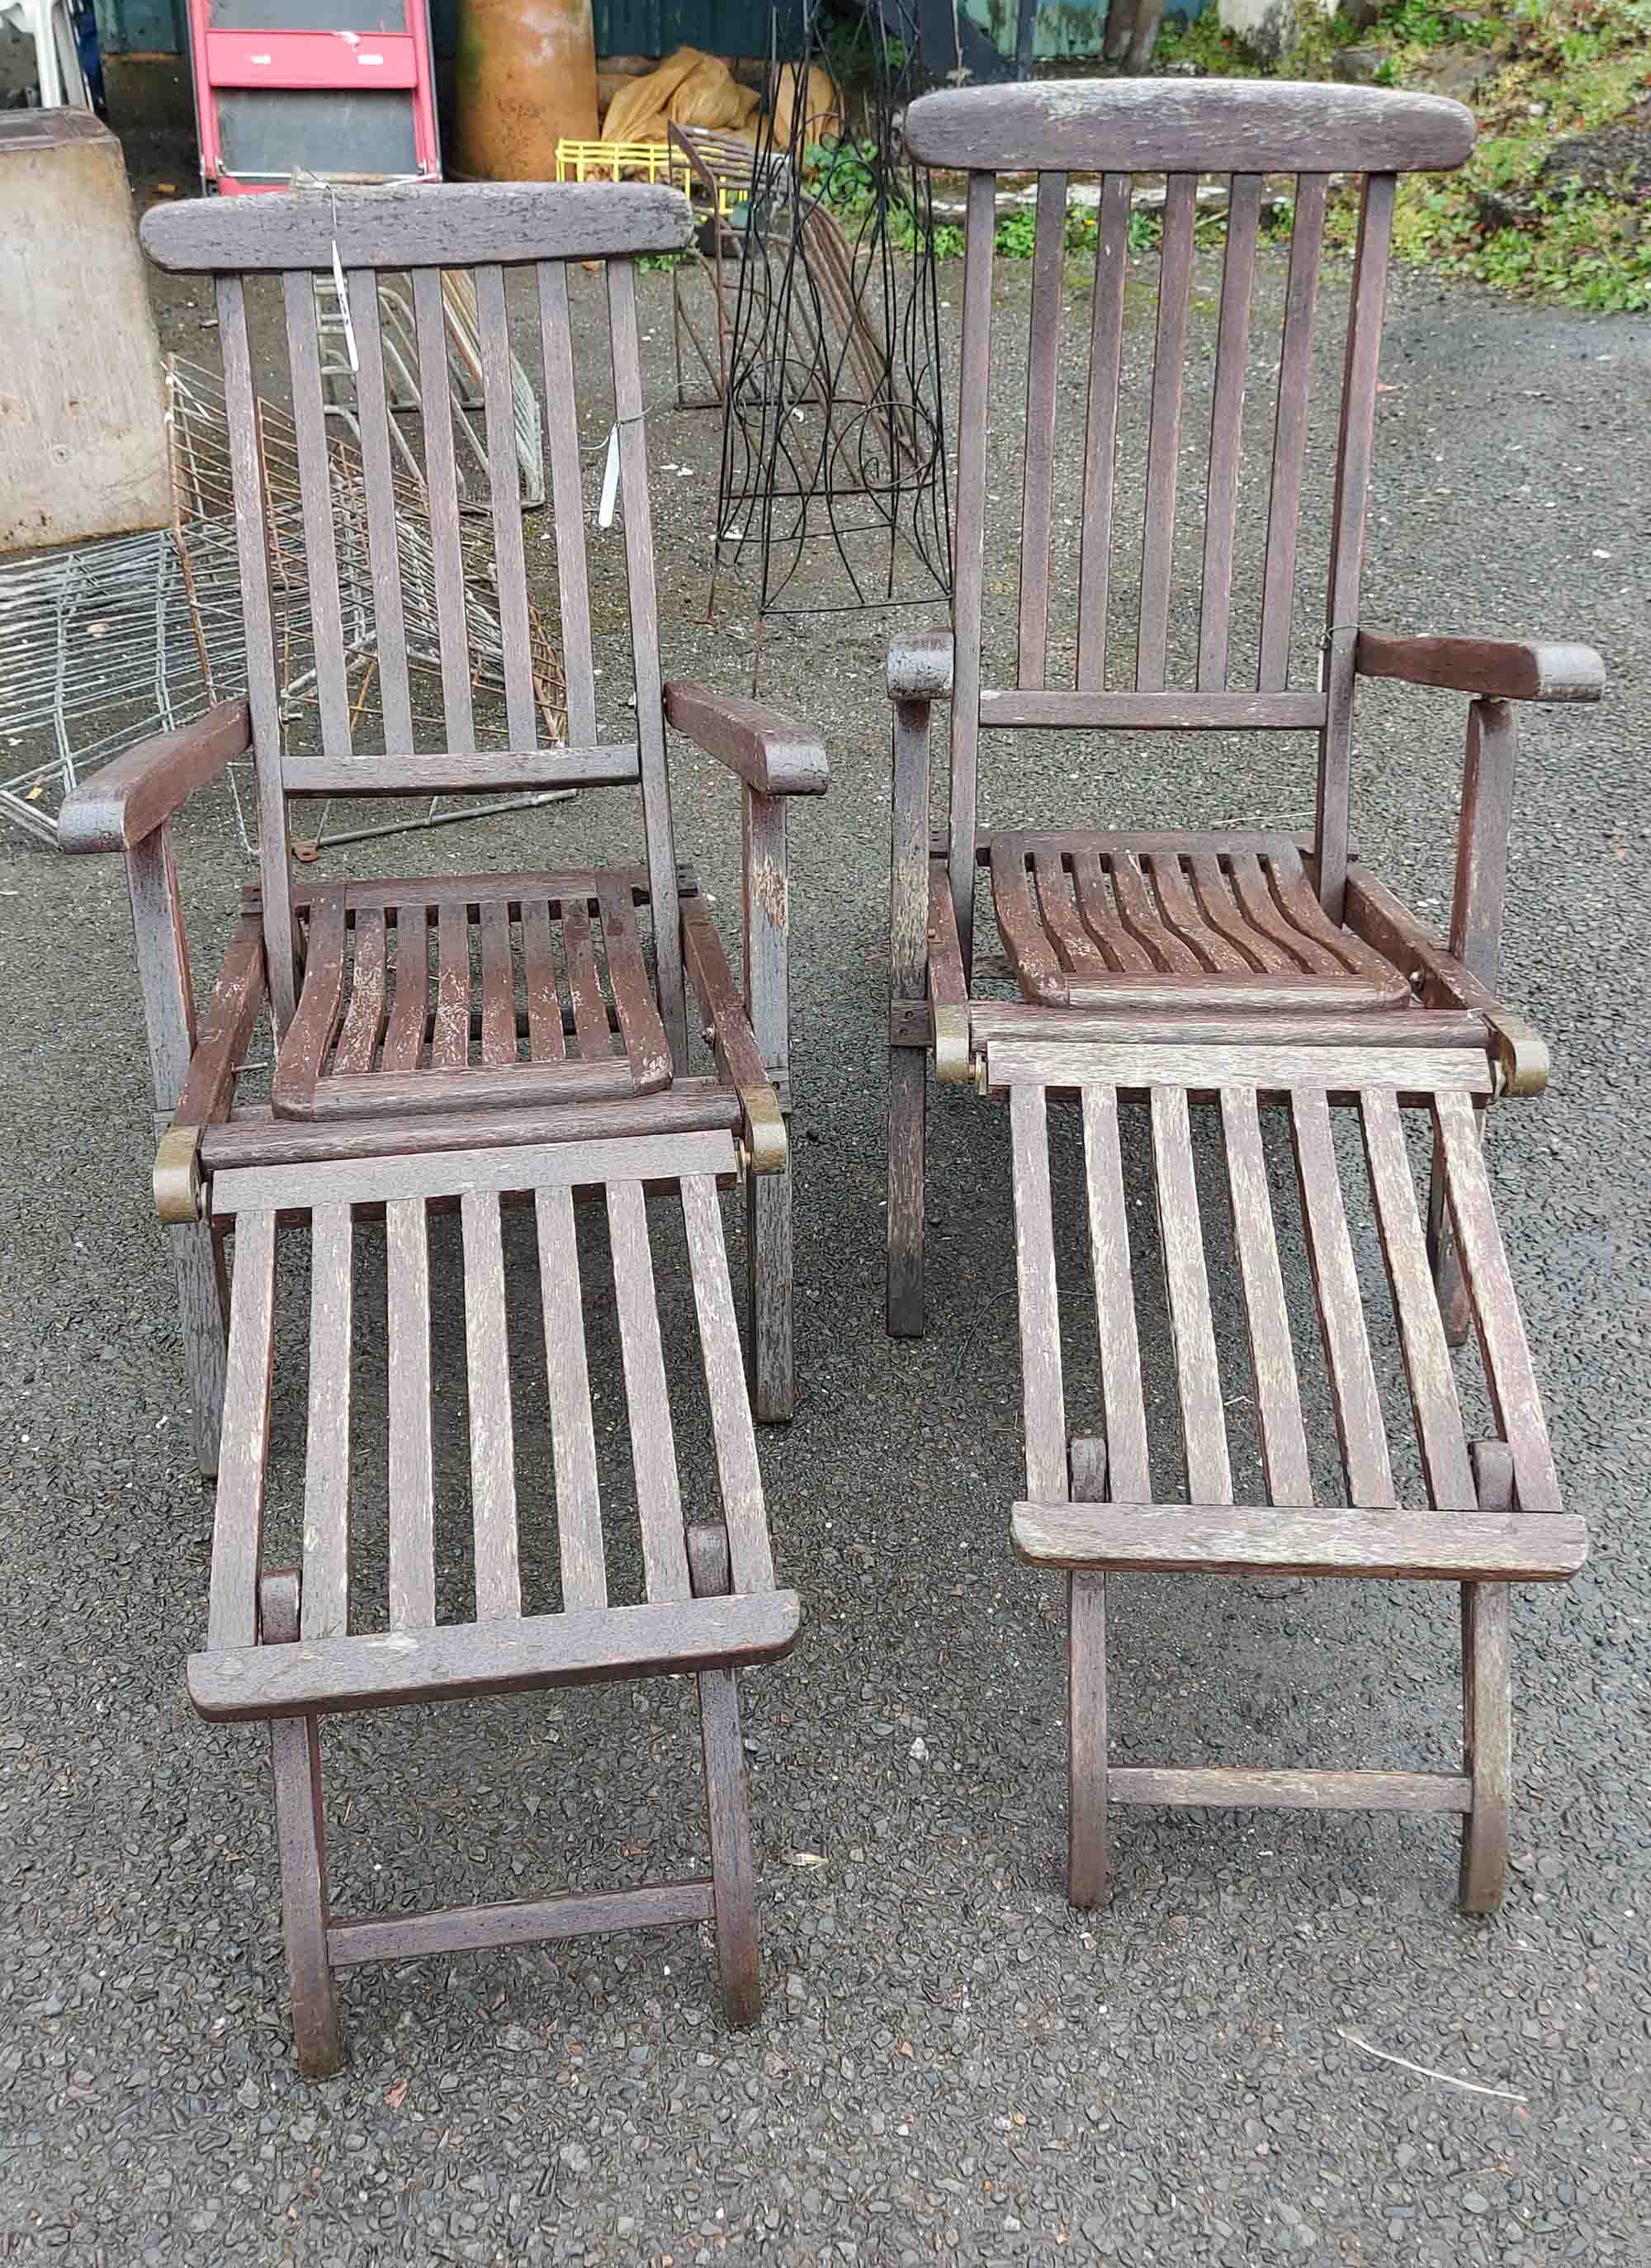 Two wooden garden lounger chairs